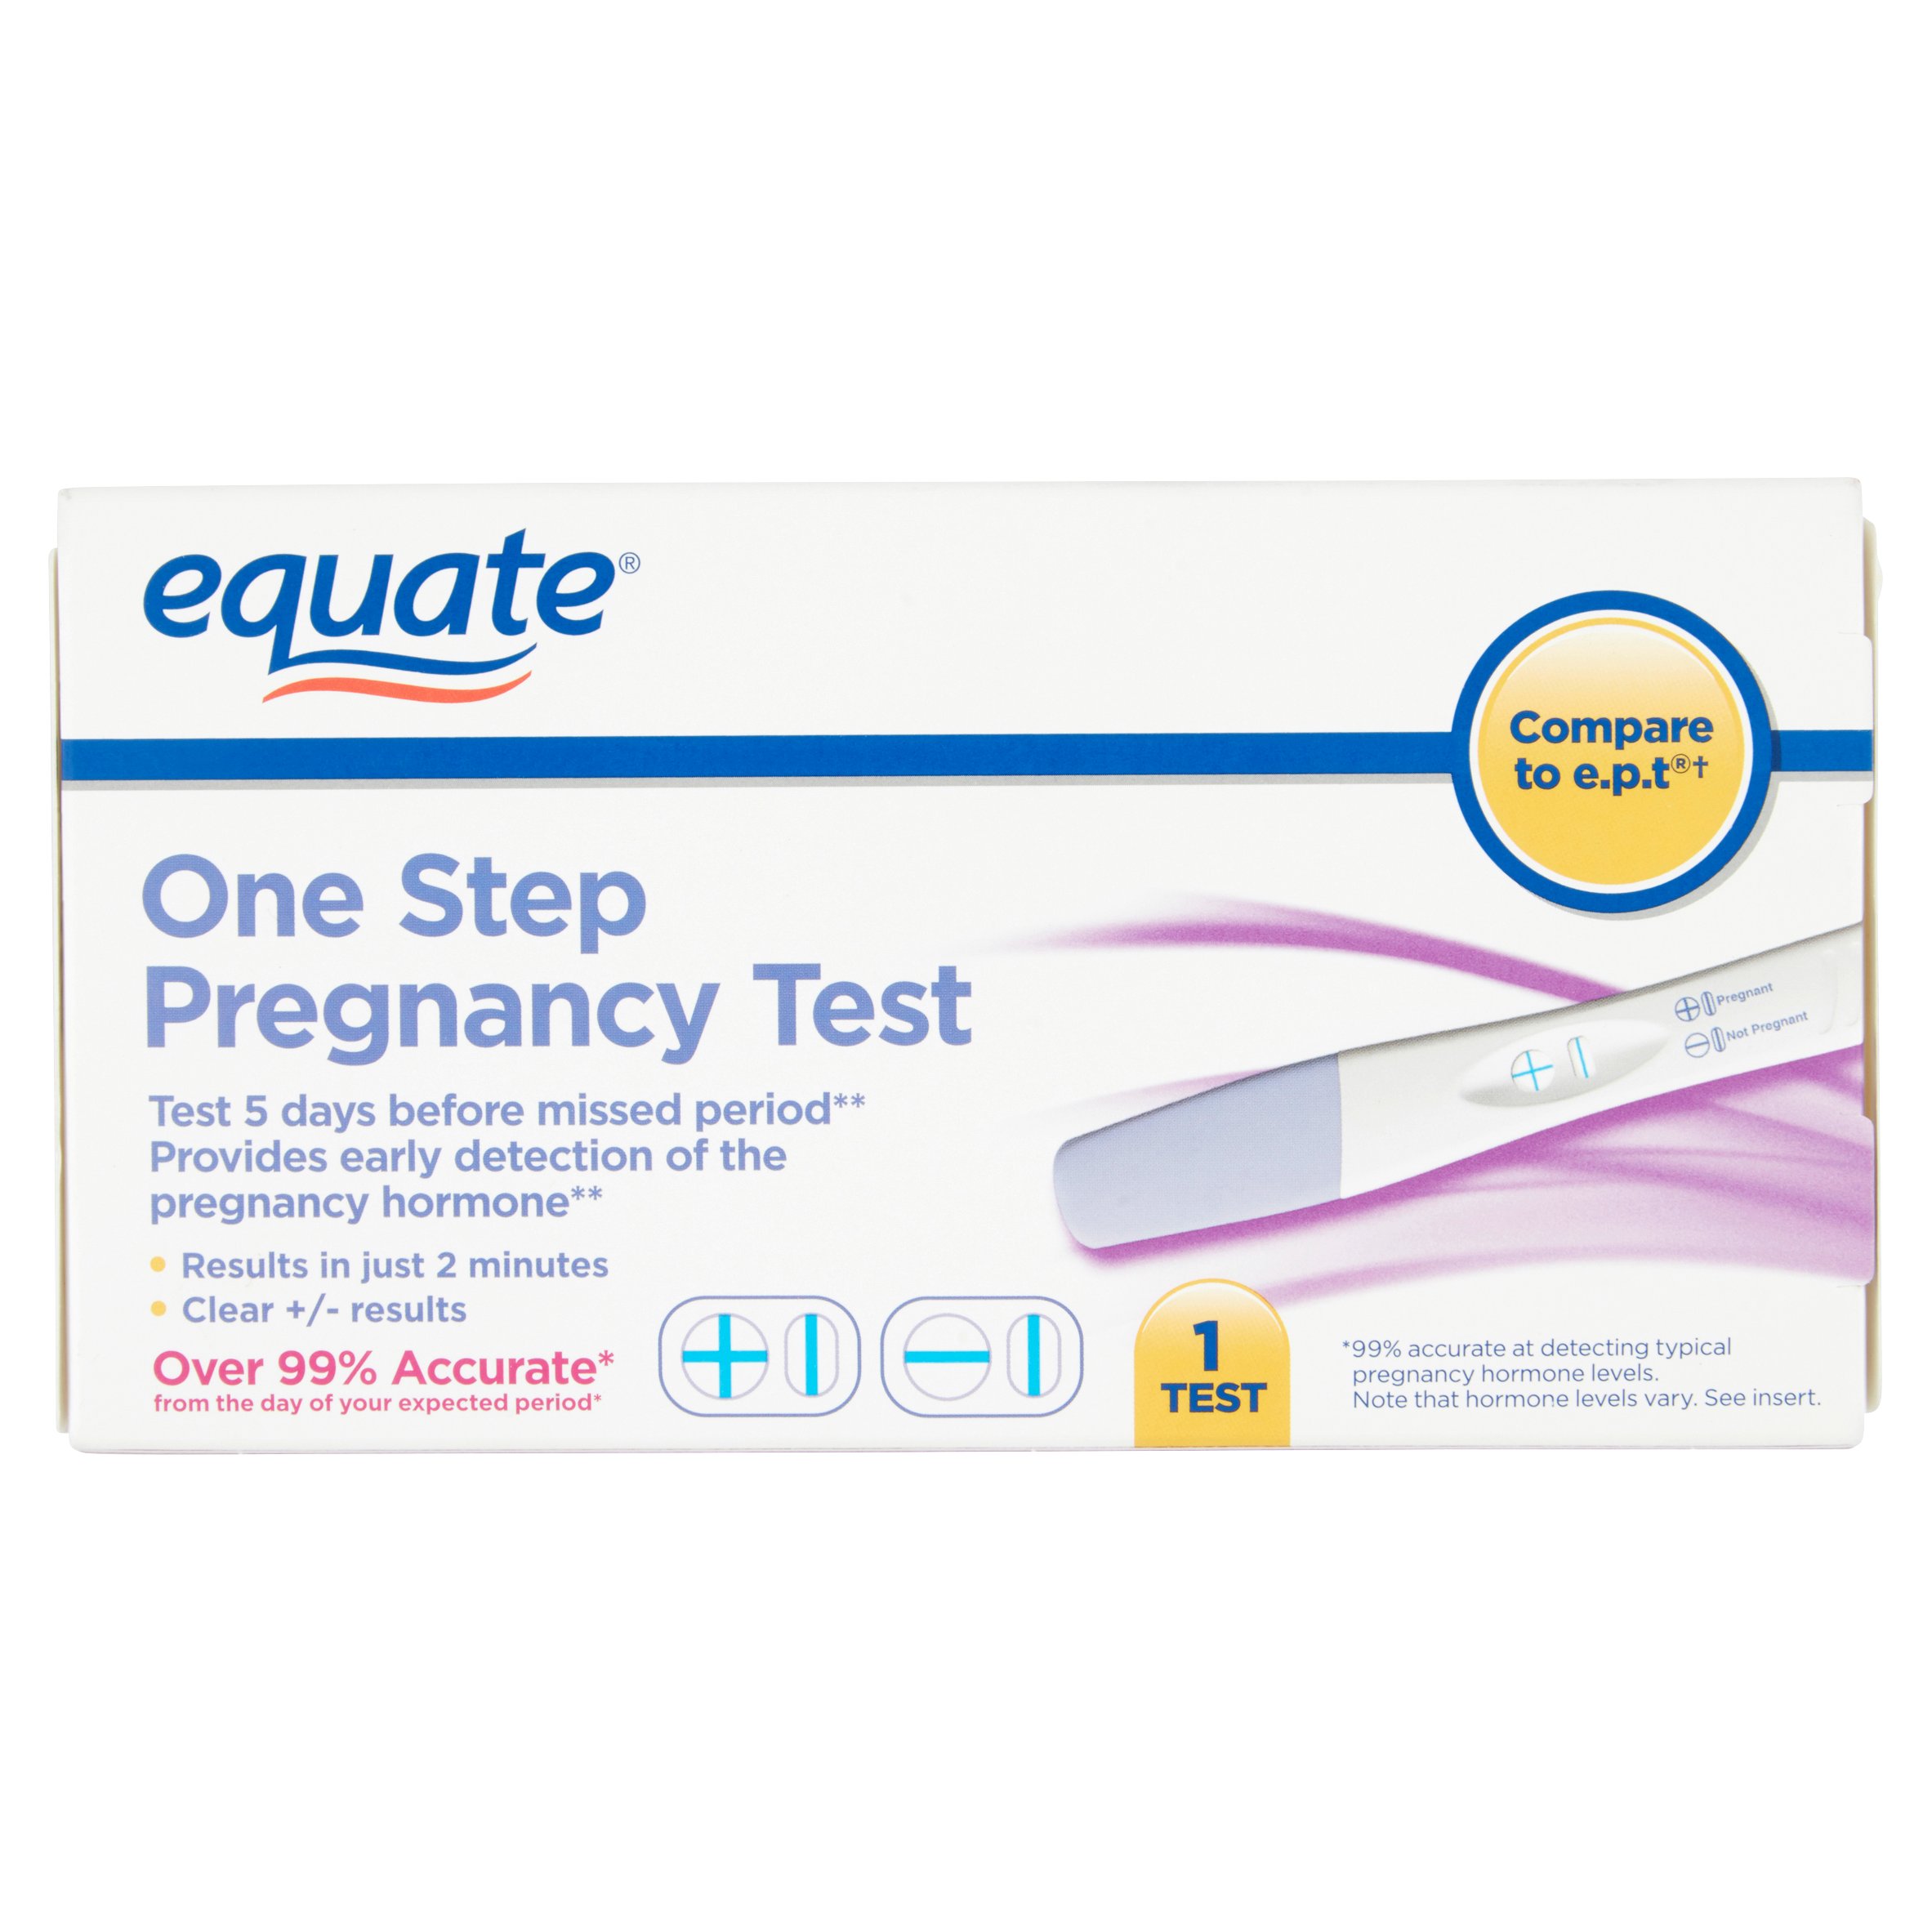 Equate One Step Pregnancy Test - image 4 of 5